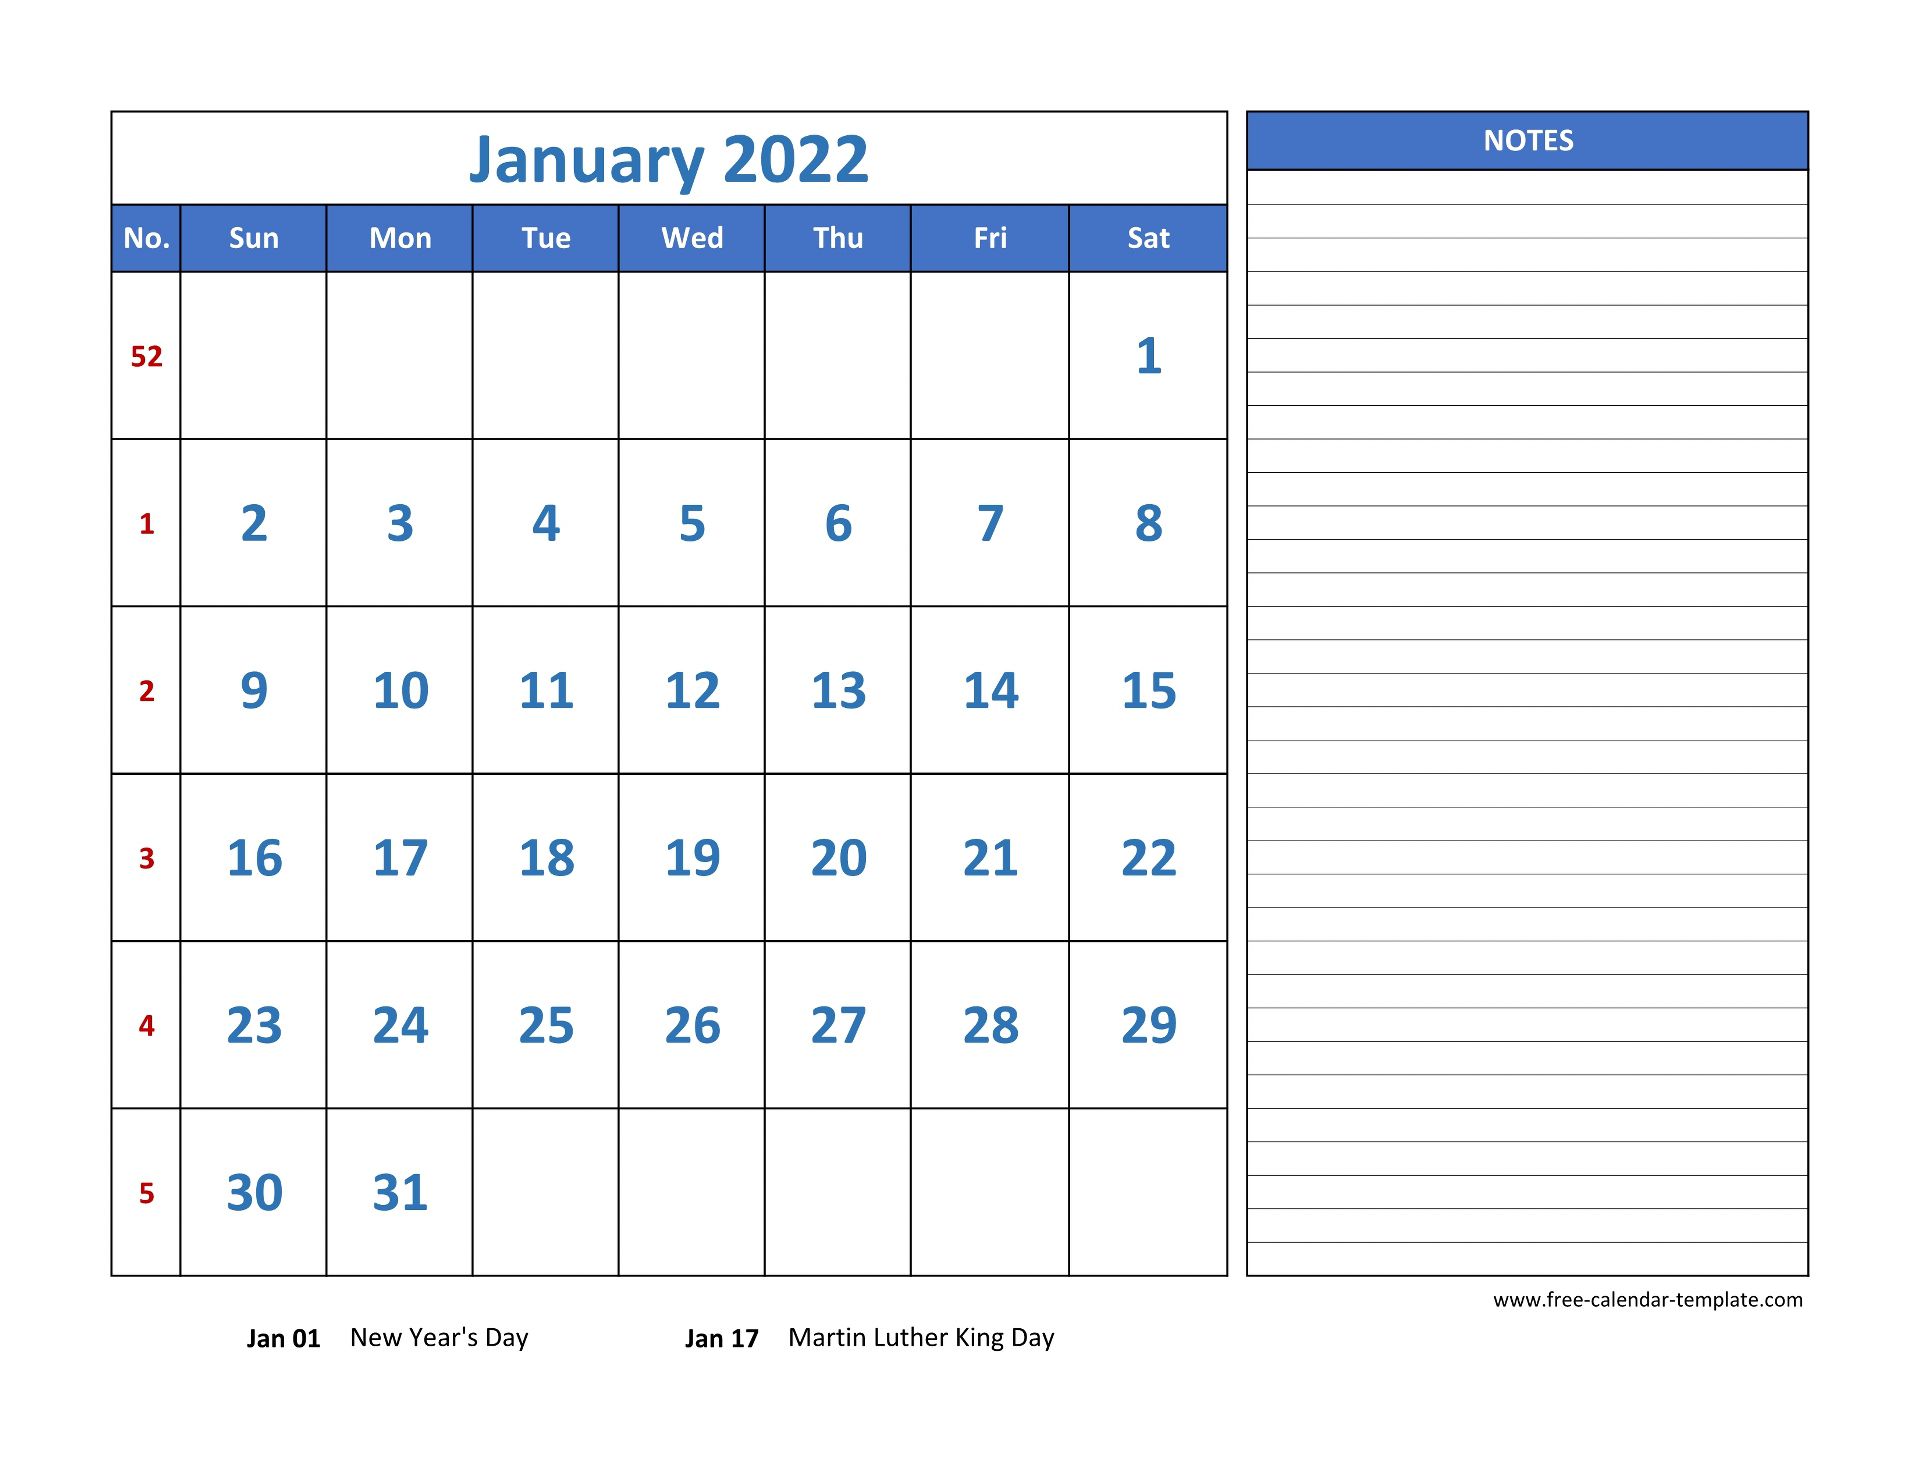 january calendar 2022 grid lines for holidays and notes